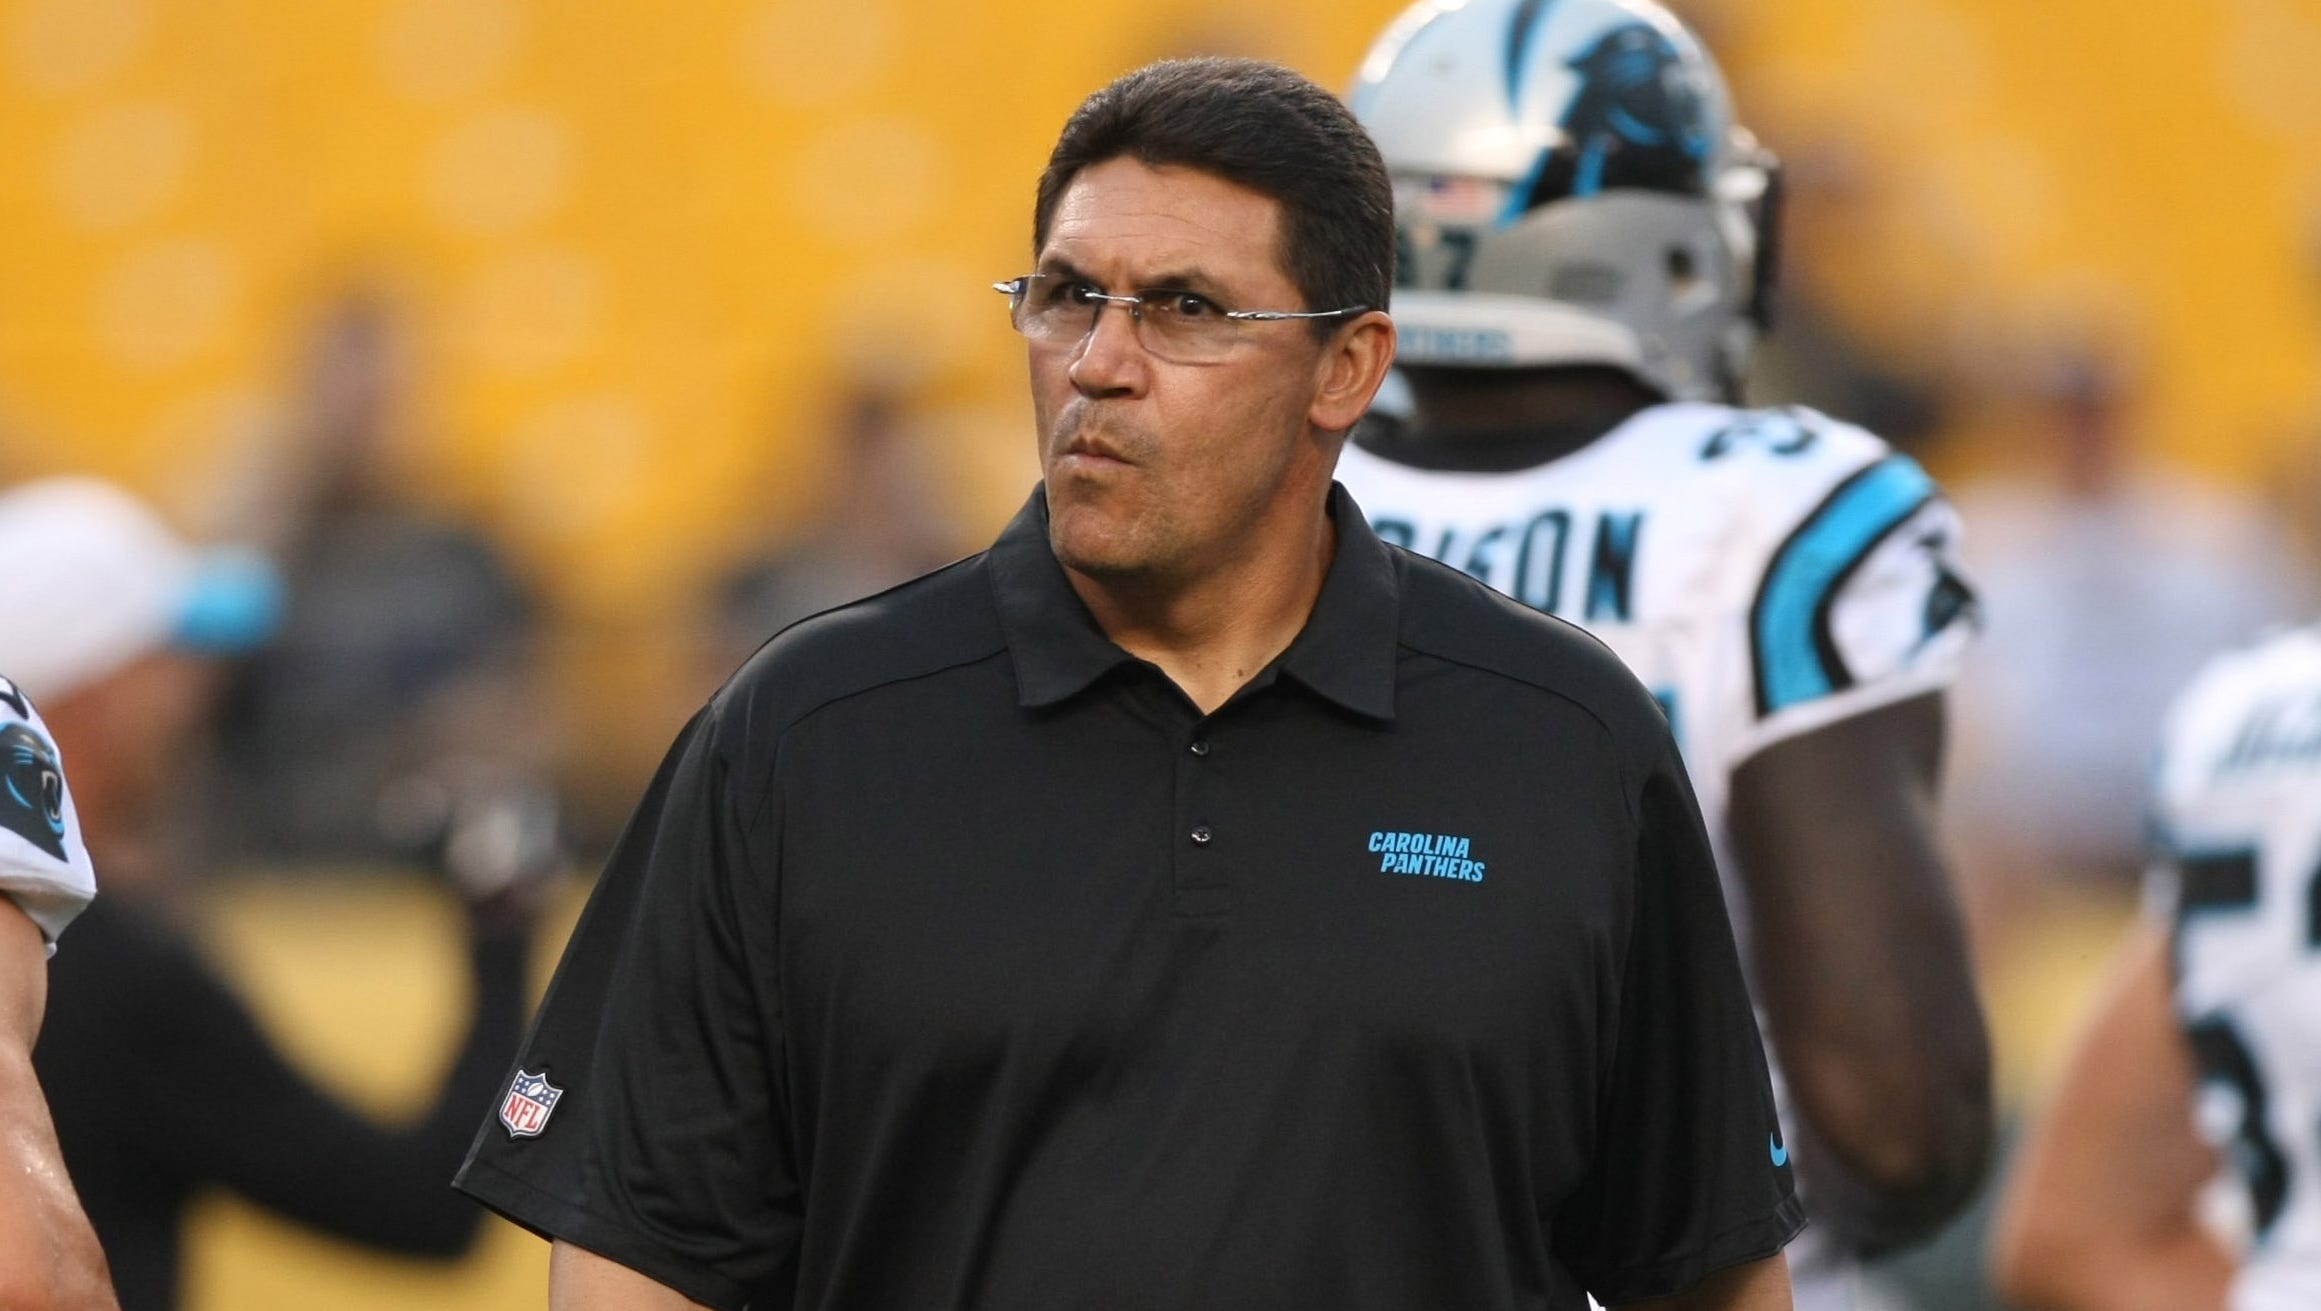 Bell Tolls: Ron Rivera is the perfect coach for these Carolina Panthers